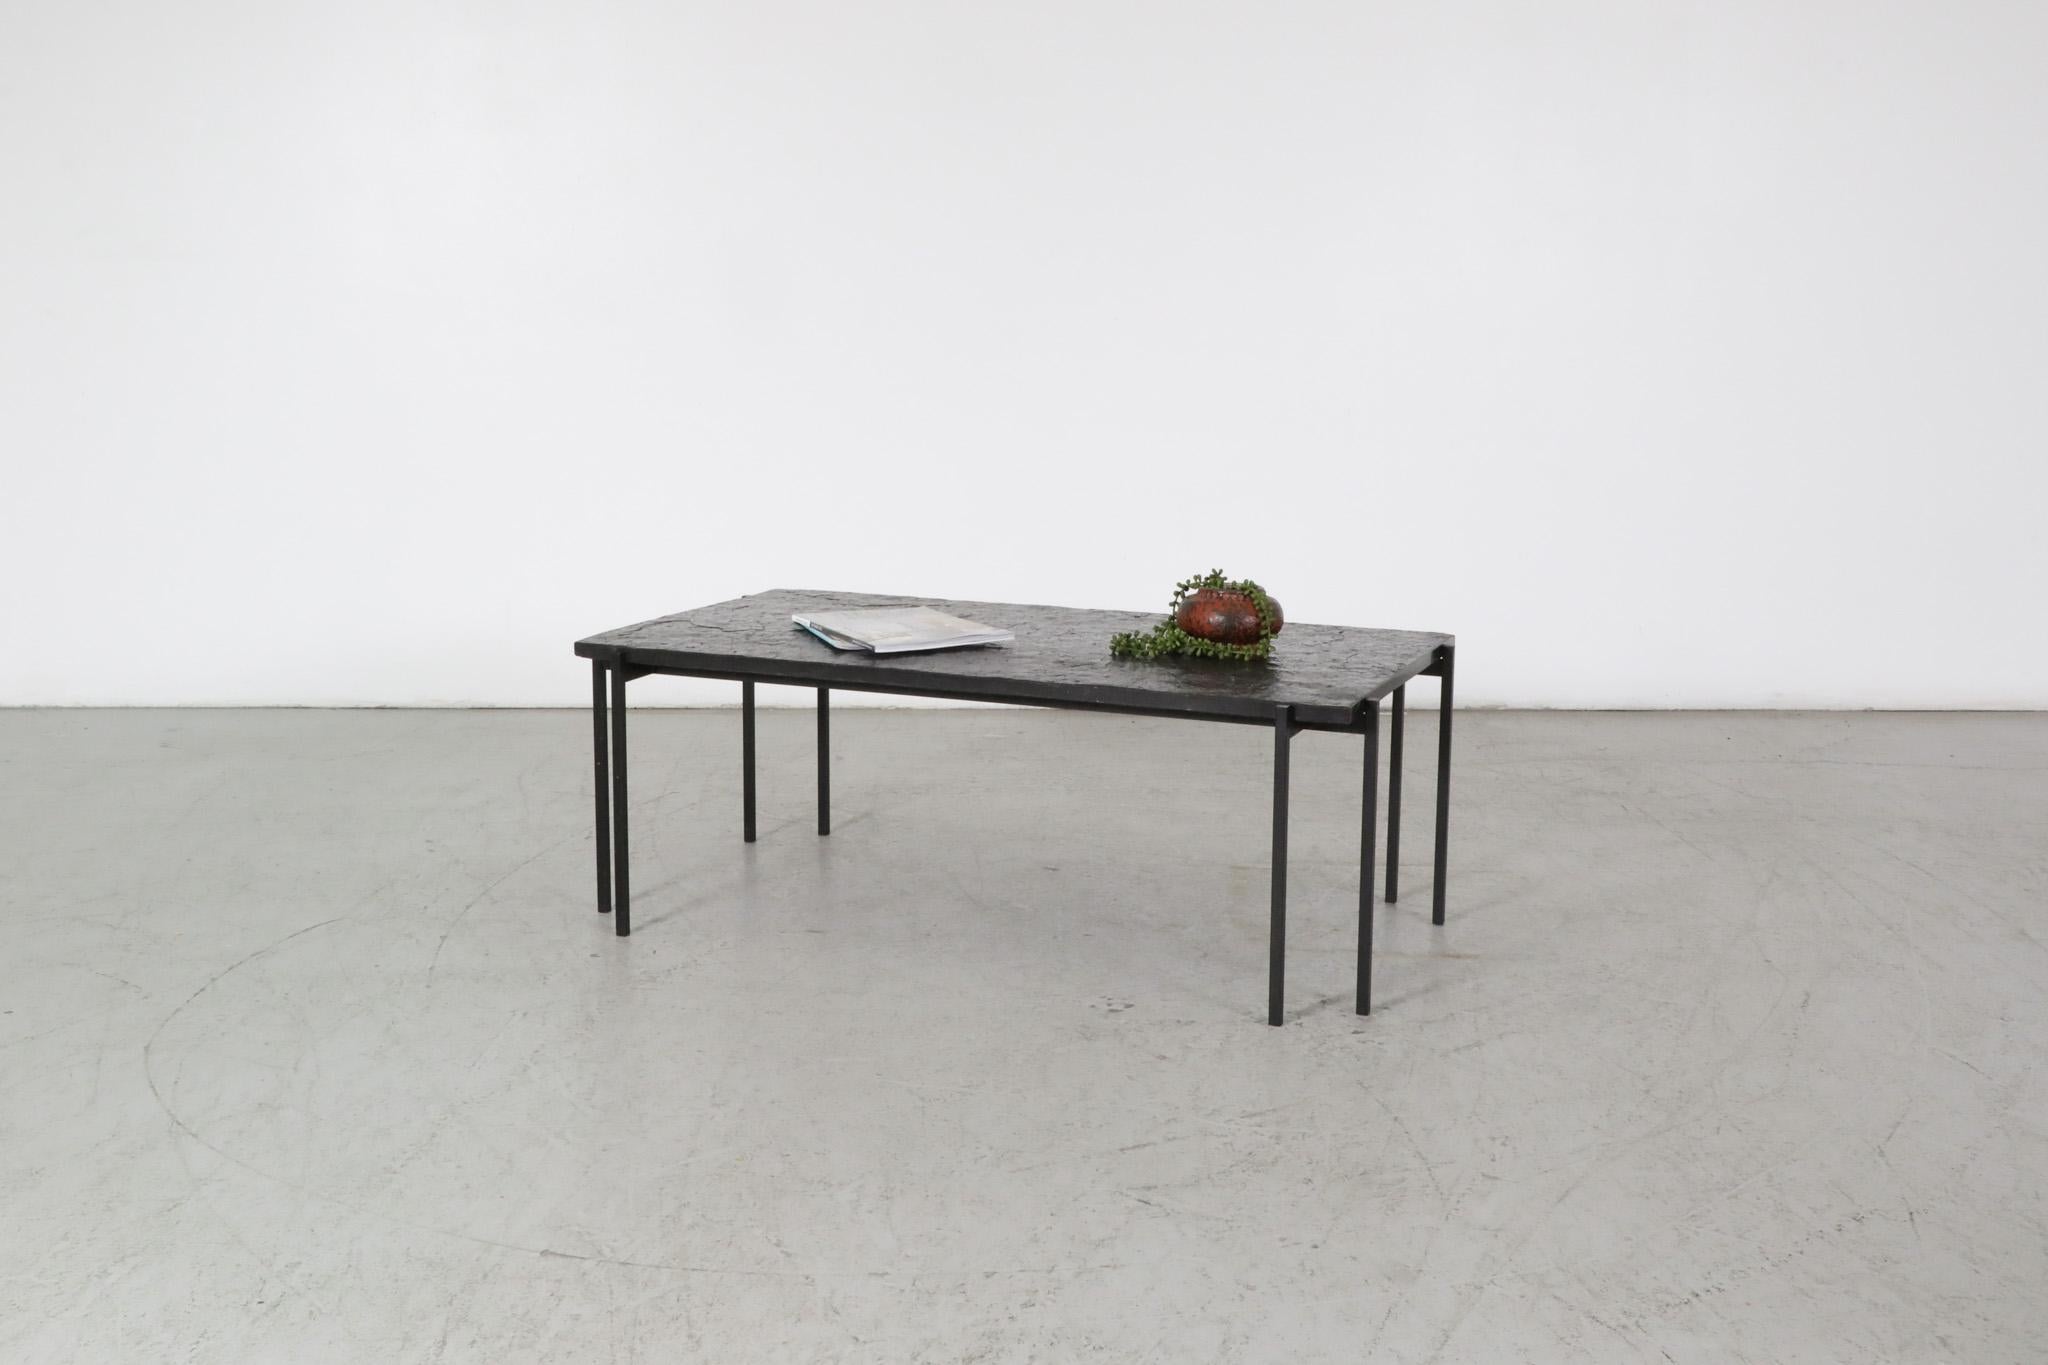 Mid-Century, 1960's, Dutch coffee table featuring a black stone top and a brutalist, black enameled metal base. The table has a strikingly architectural design with attractively split legs on each corner. It is in original condition with some